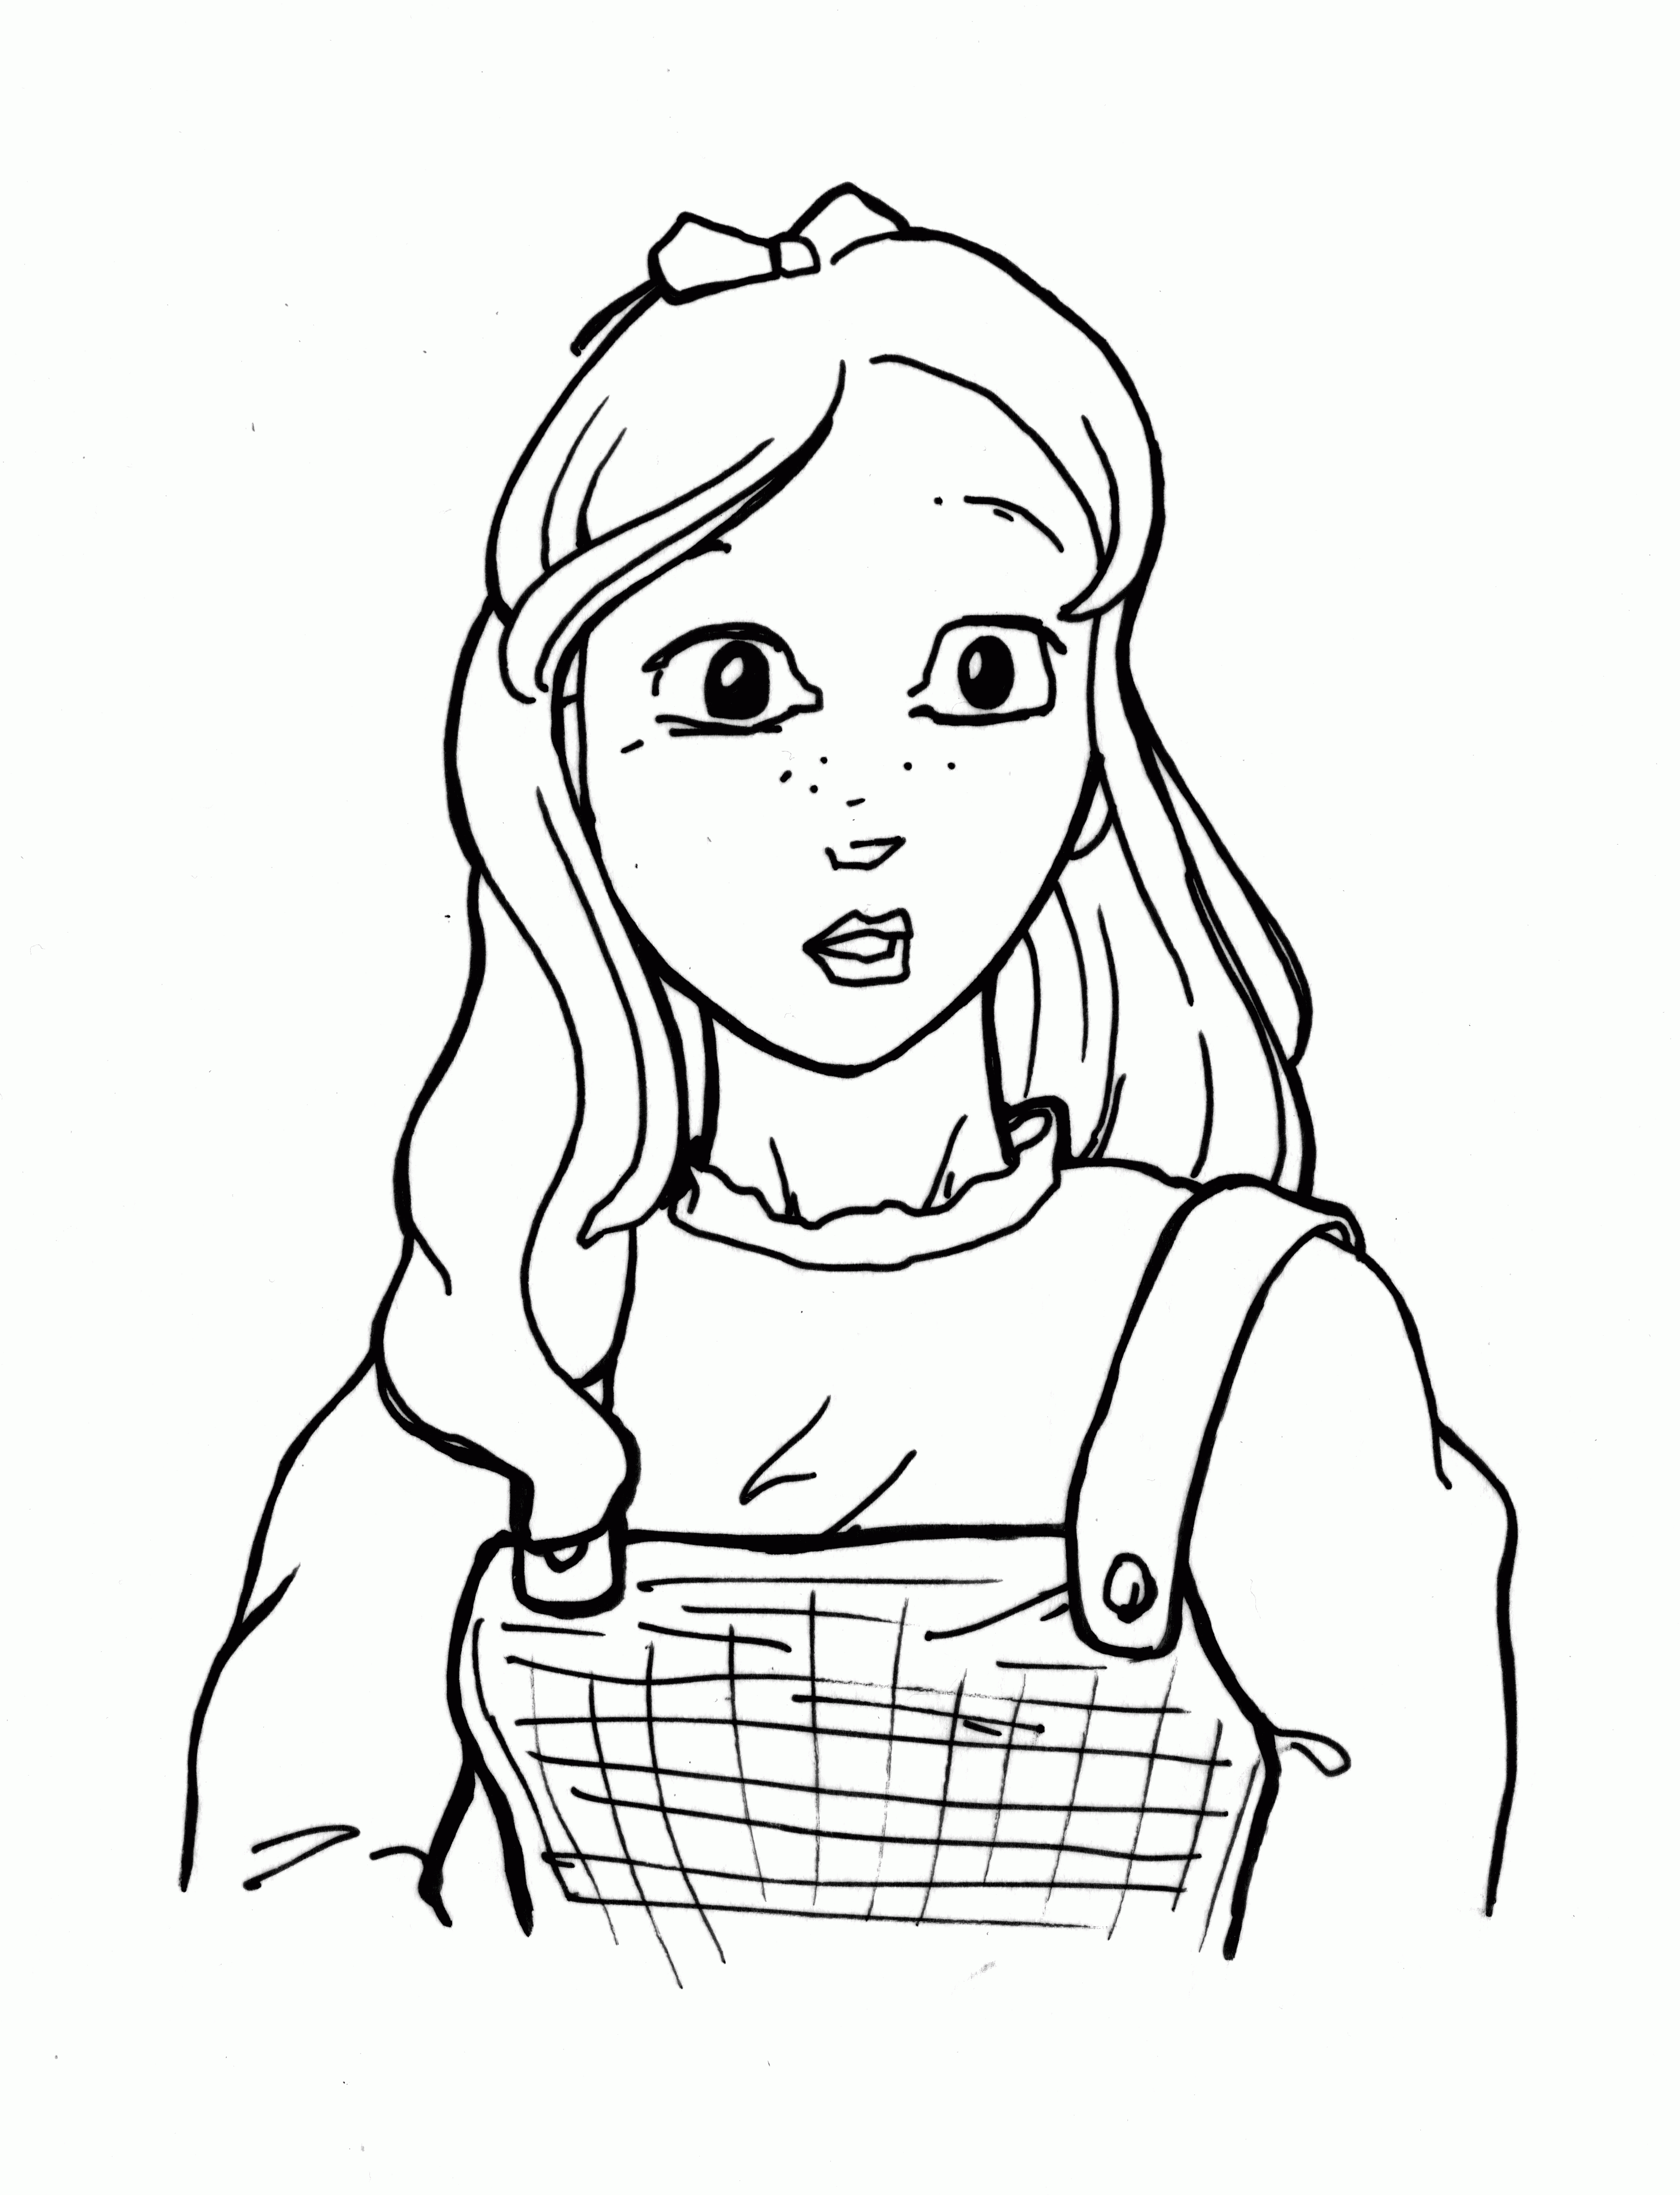 Wizard Of Oz Coloring Pages Tin Man - HiColoringPages